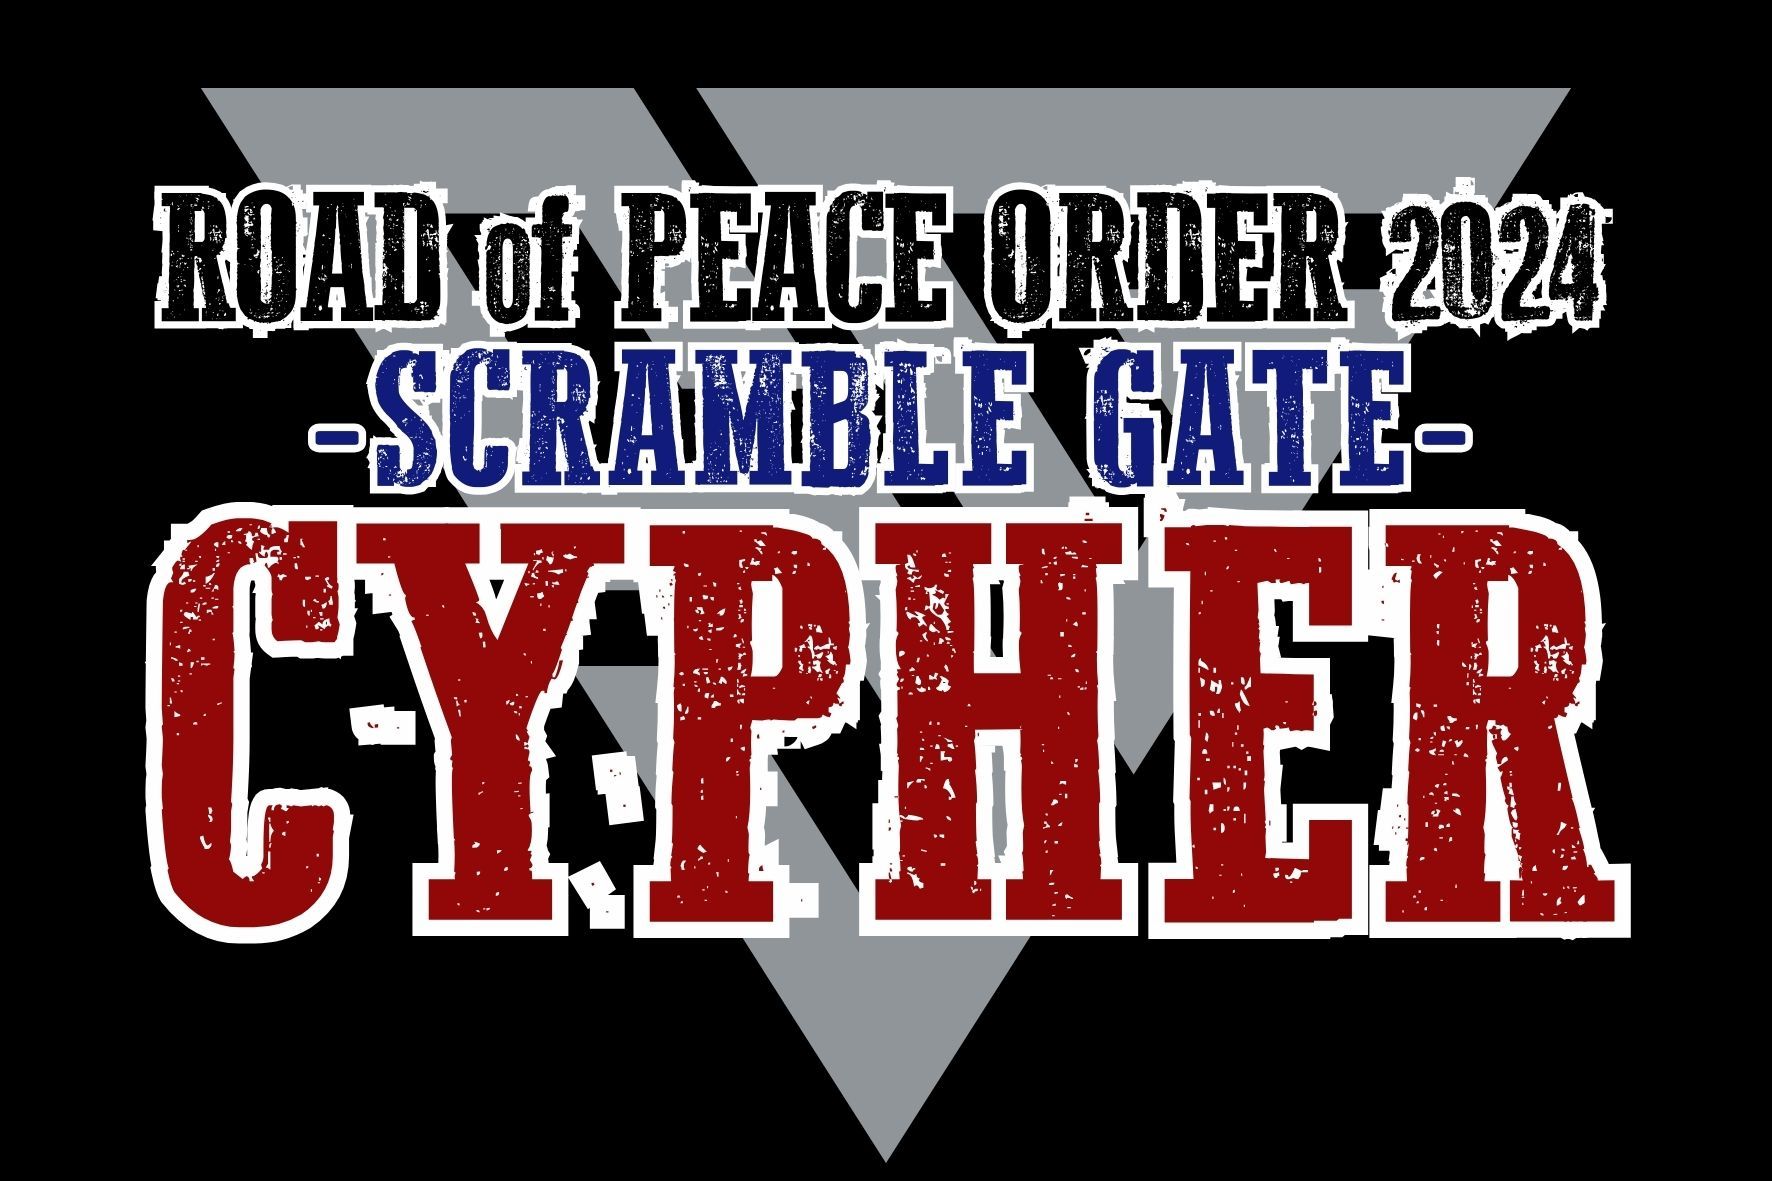 SCRAMBLE GATE CYPHER-Road of PEACE ORDER 2024-